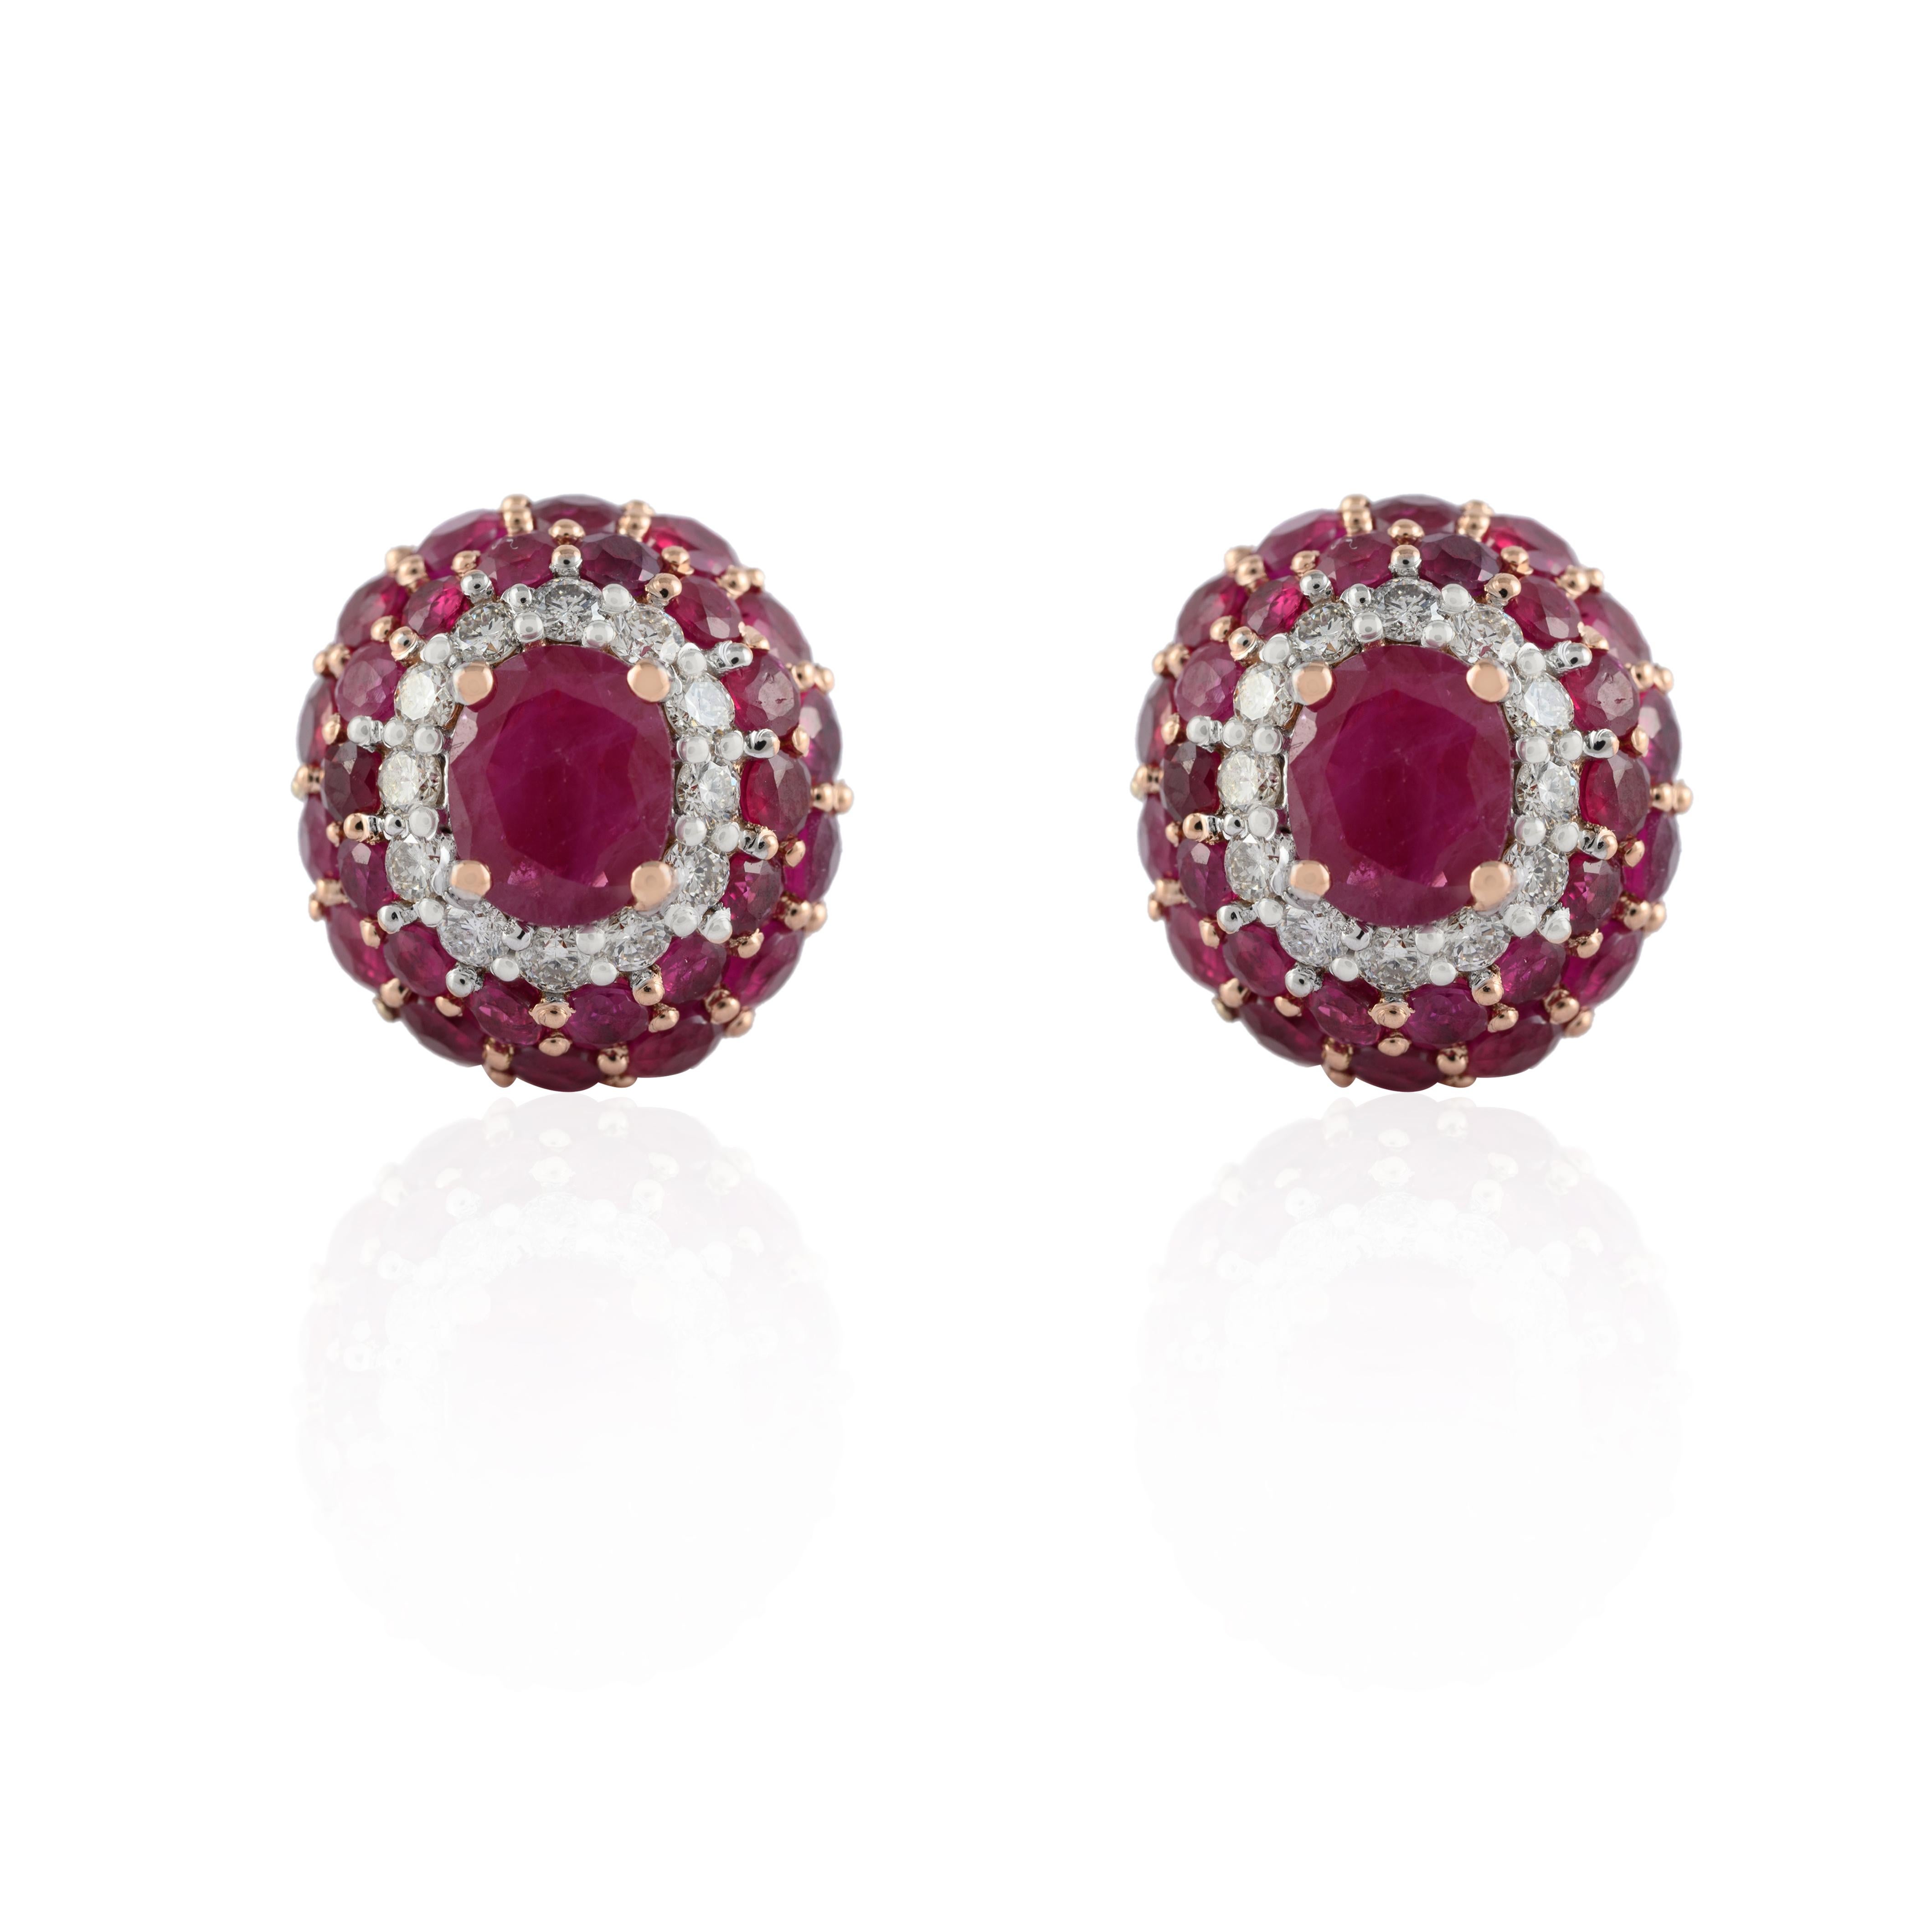 Ruby and Diamond Pushback Stud Earrings in 14K gold. Embrace your look with these stunning pair of earrings suitable for any occasion to complete your outfit.
Ruby gemstone brings power, wealth and protection. 
Featuring 6.93 carats of ruby studded